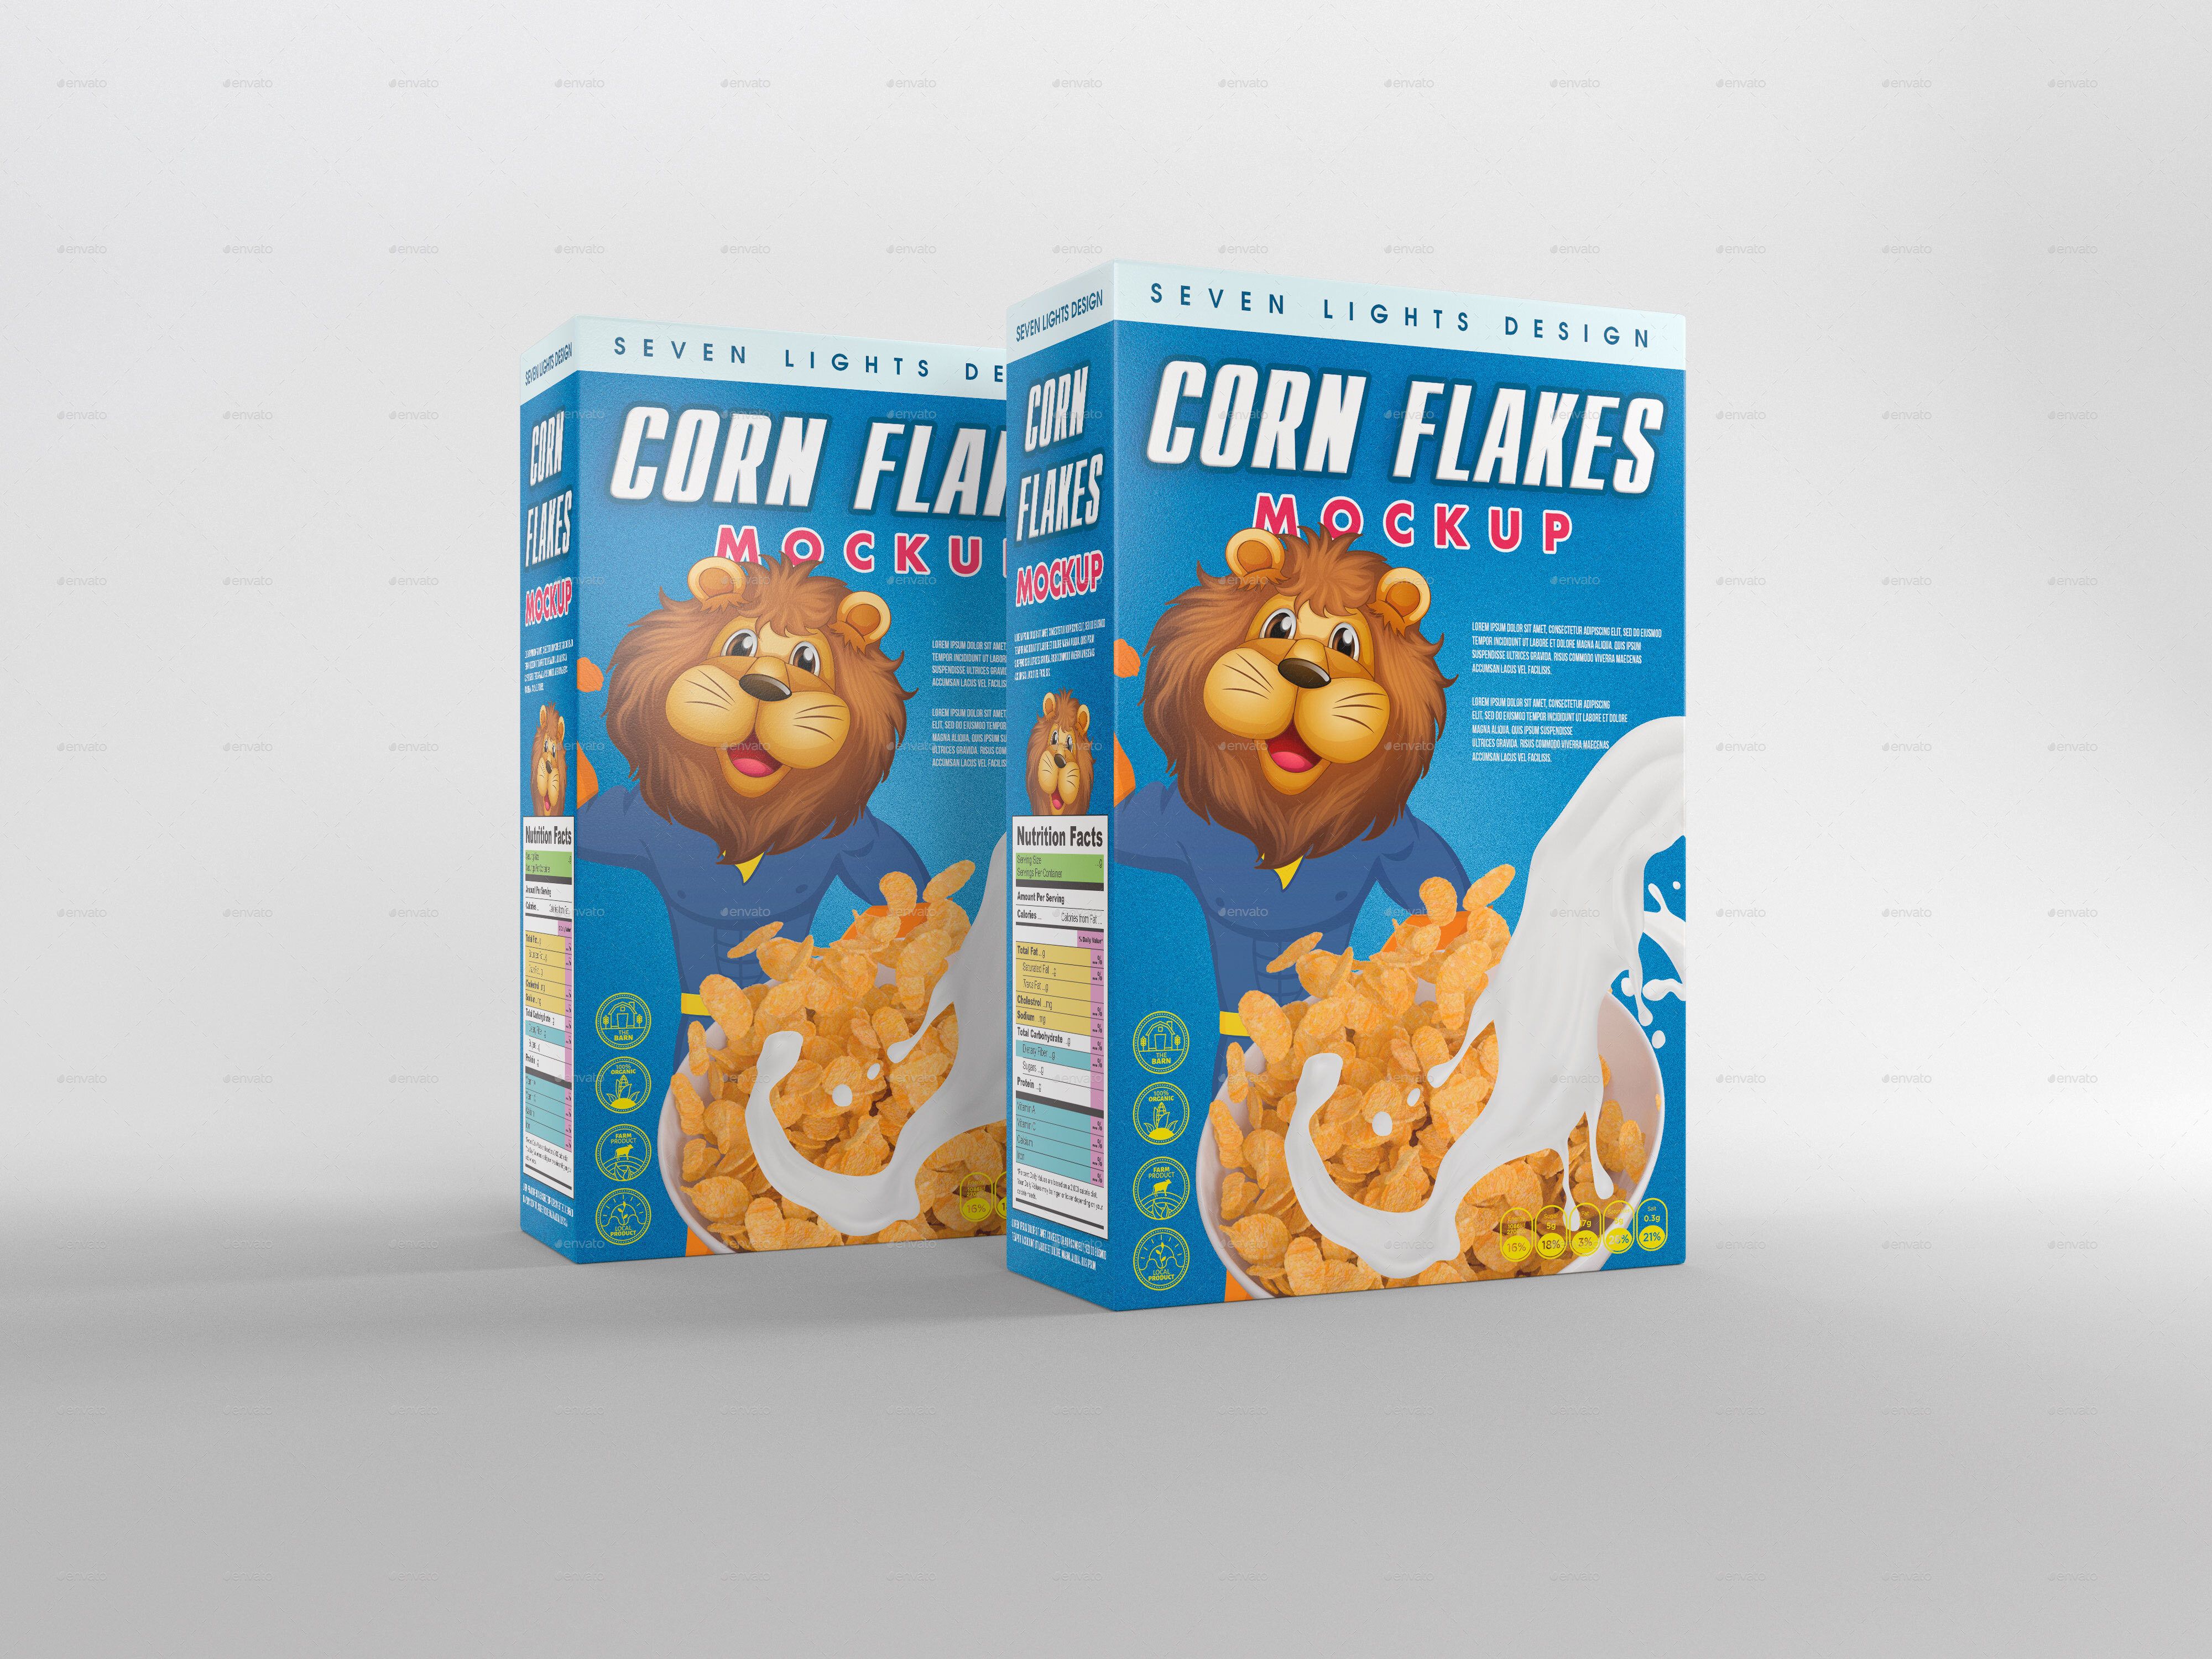 Download Cereal Package Mockup by 7Lights | GraphicRiver